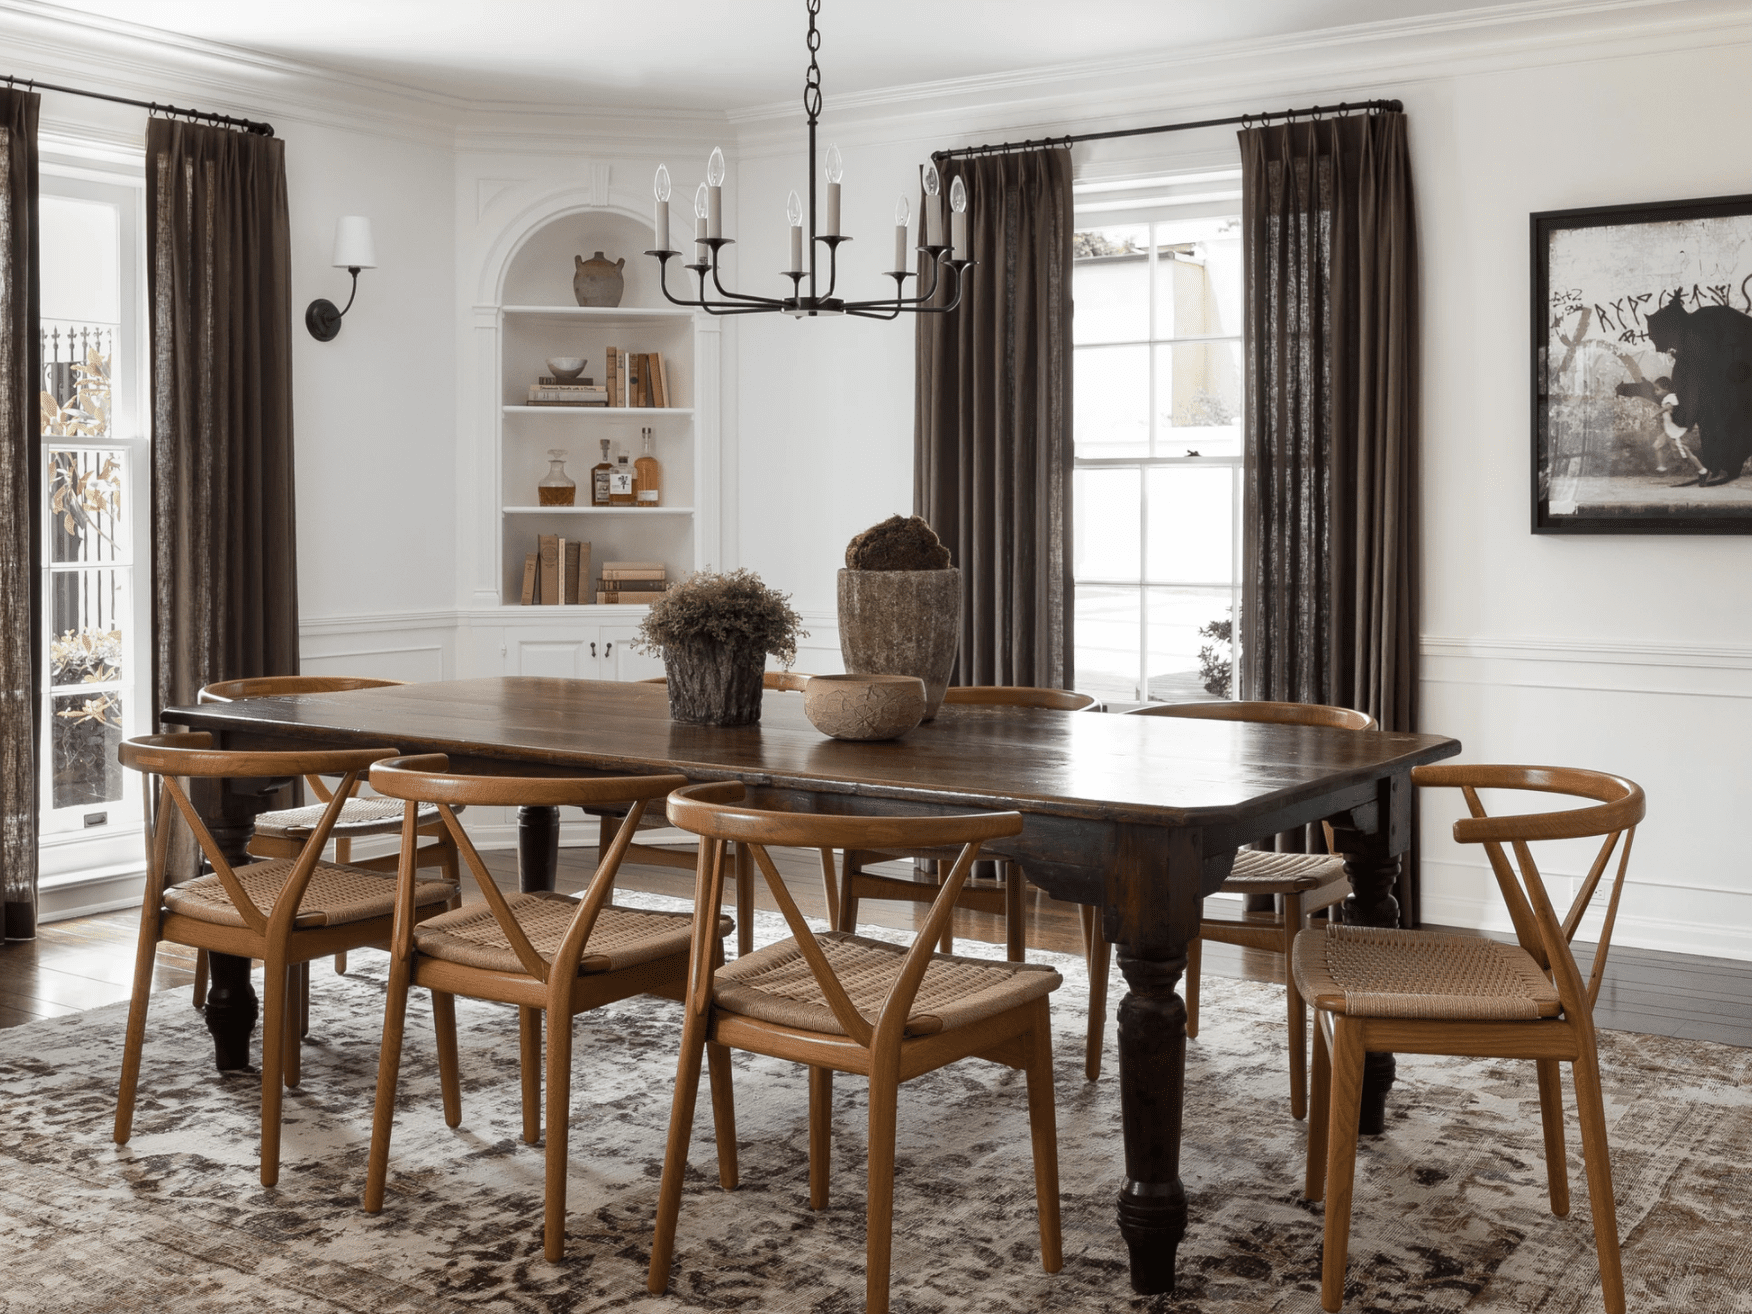 Use Elegant Curtains for the Dining Room